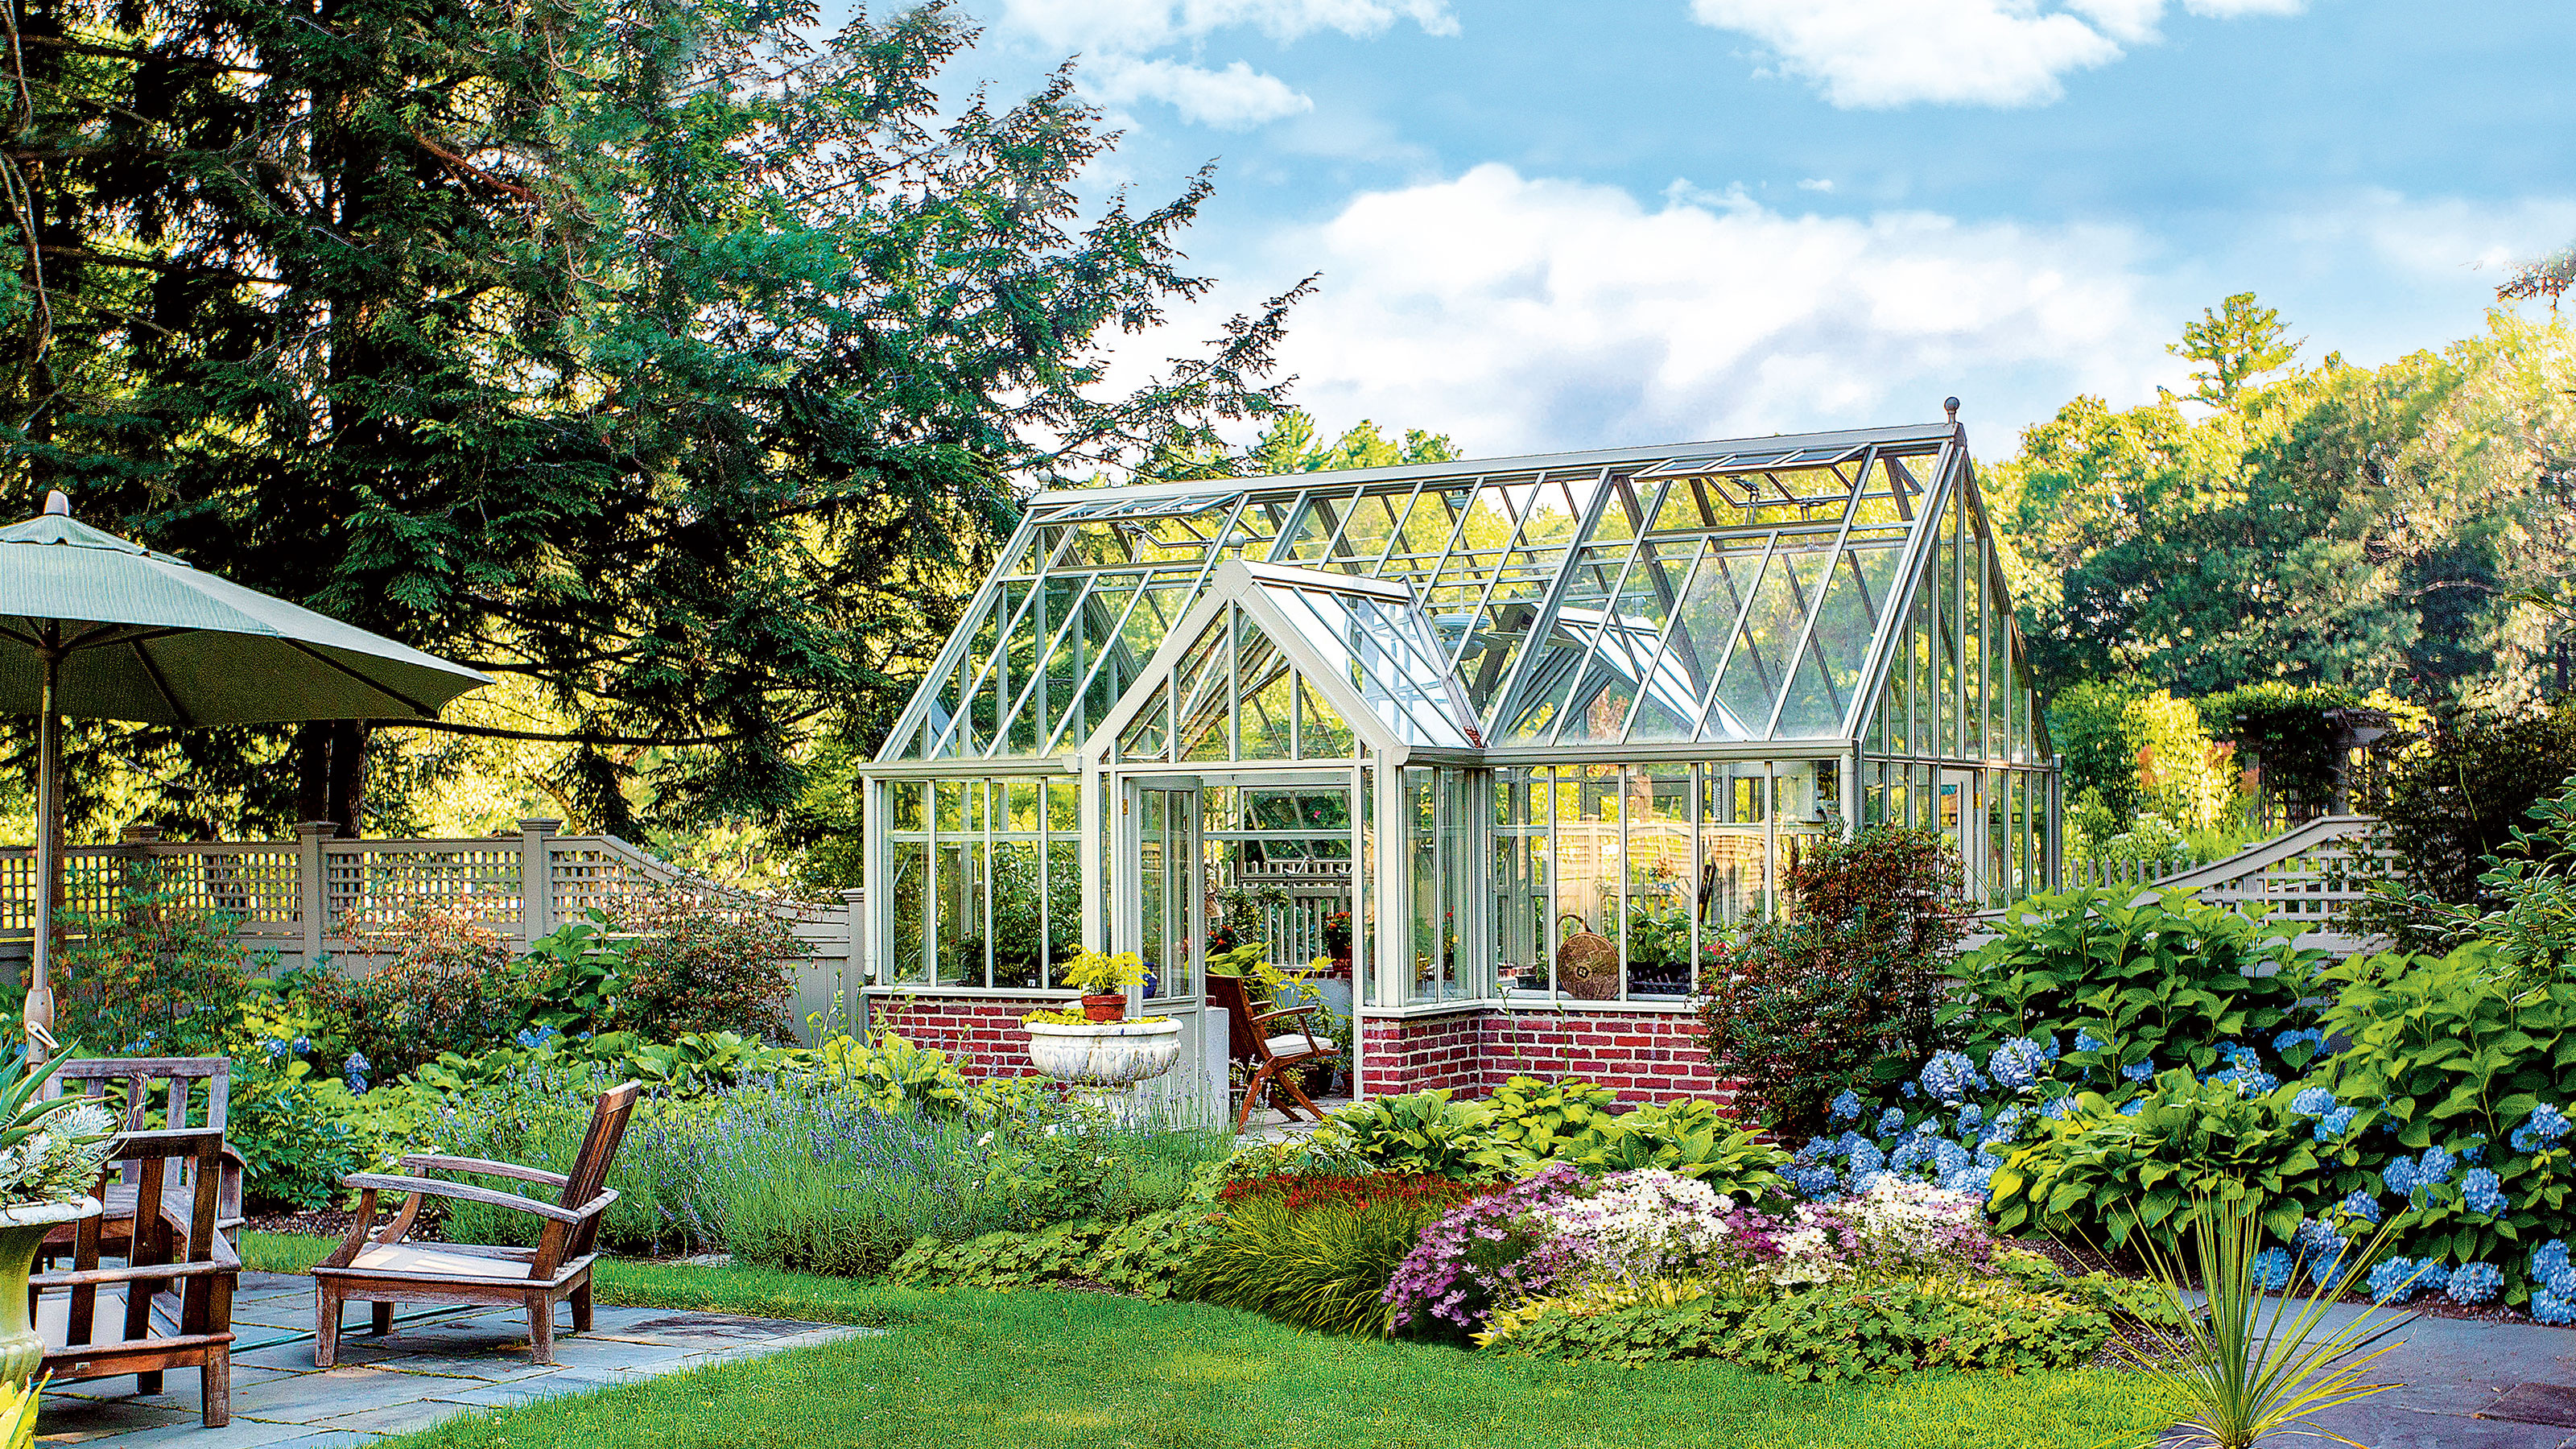 an image of a tall glass greenhouse in a garden space surrounded by plants